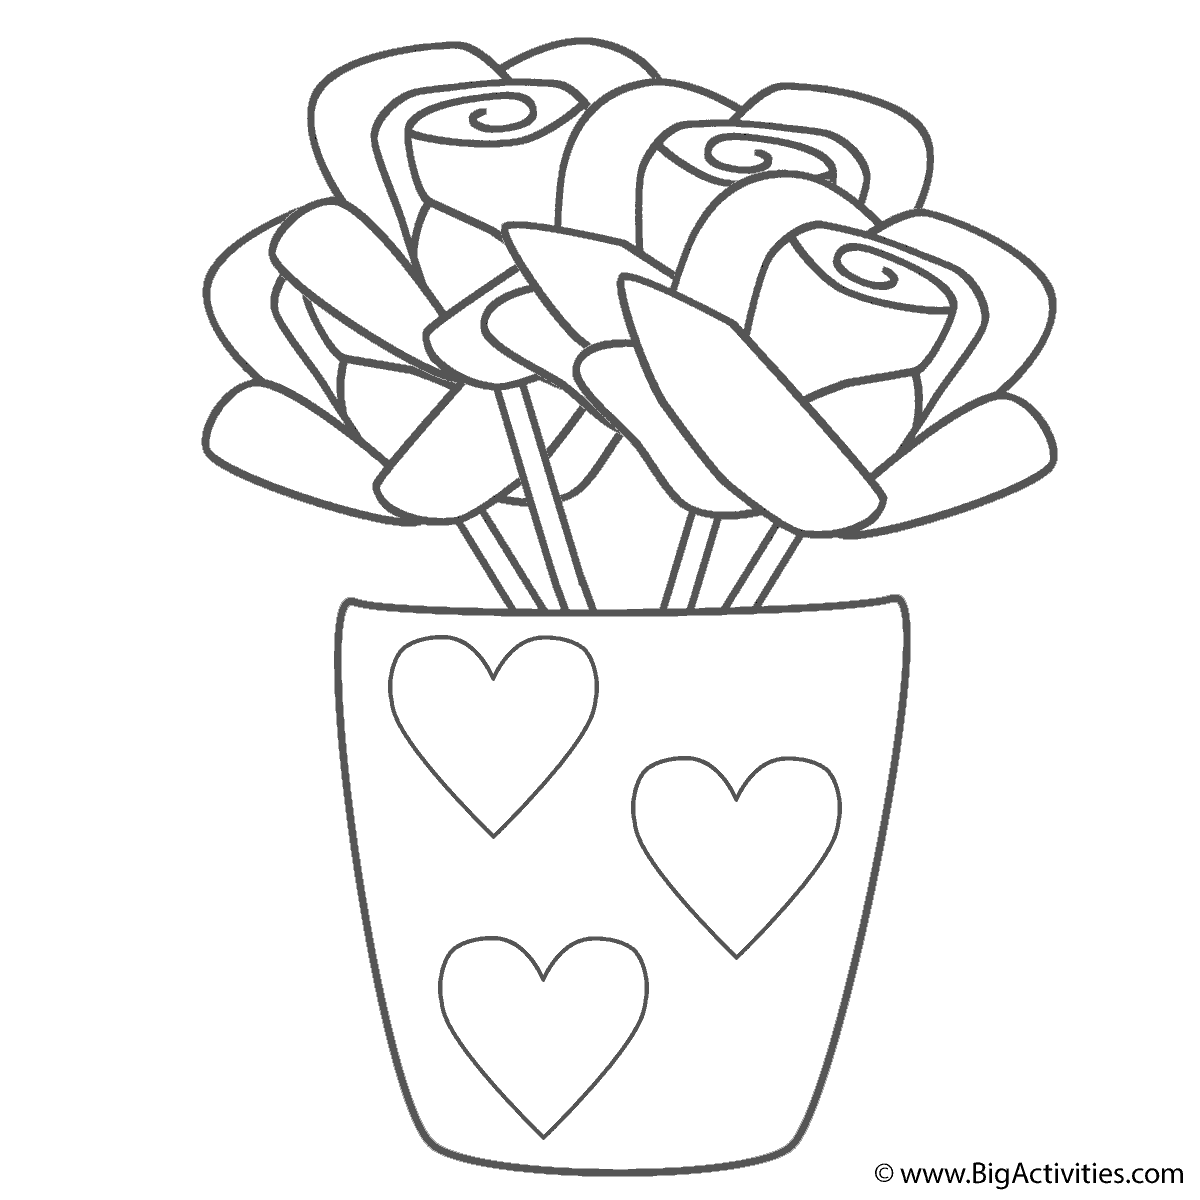 Roses in Vase with Hearts - Coloring Page (Summer)